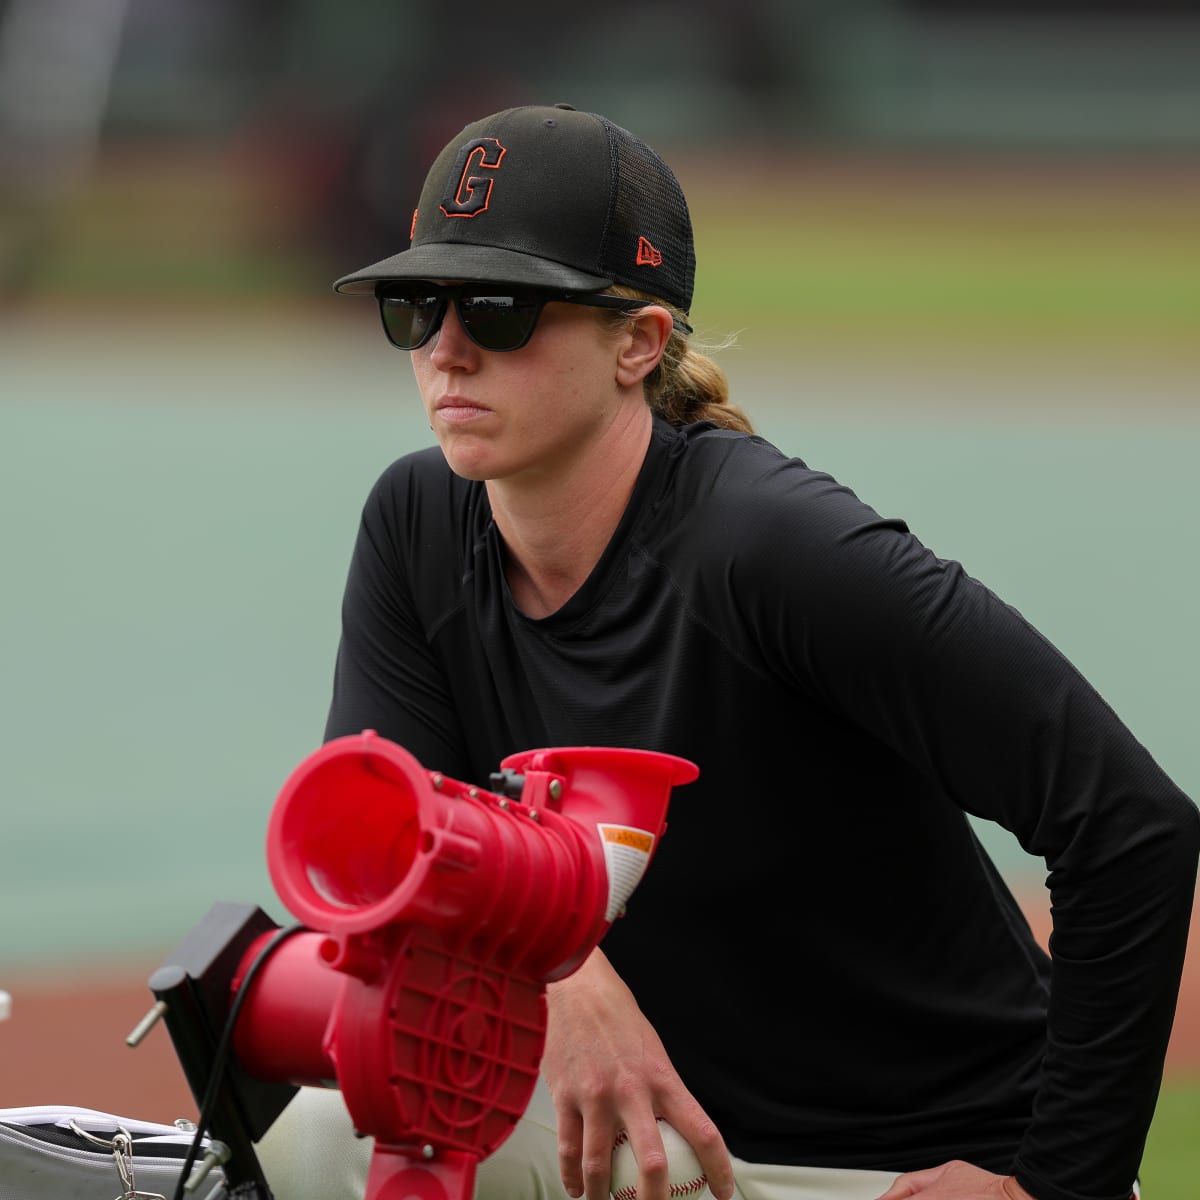 Alyssa Nakken made MLB history as the first woman to coach on the